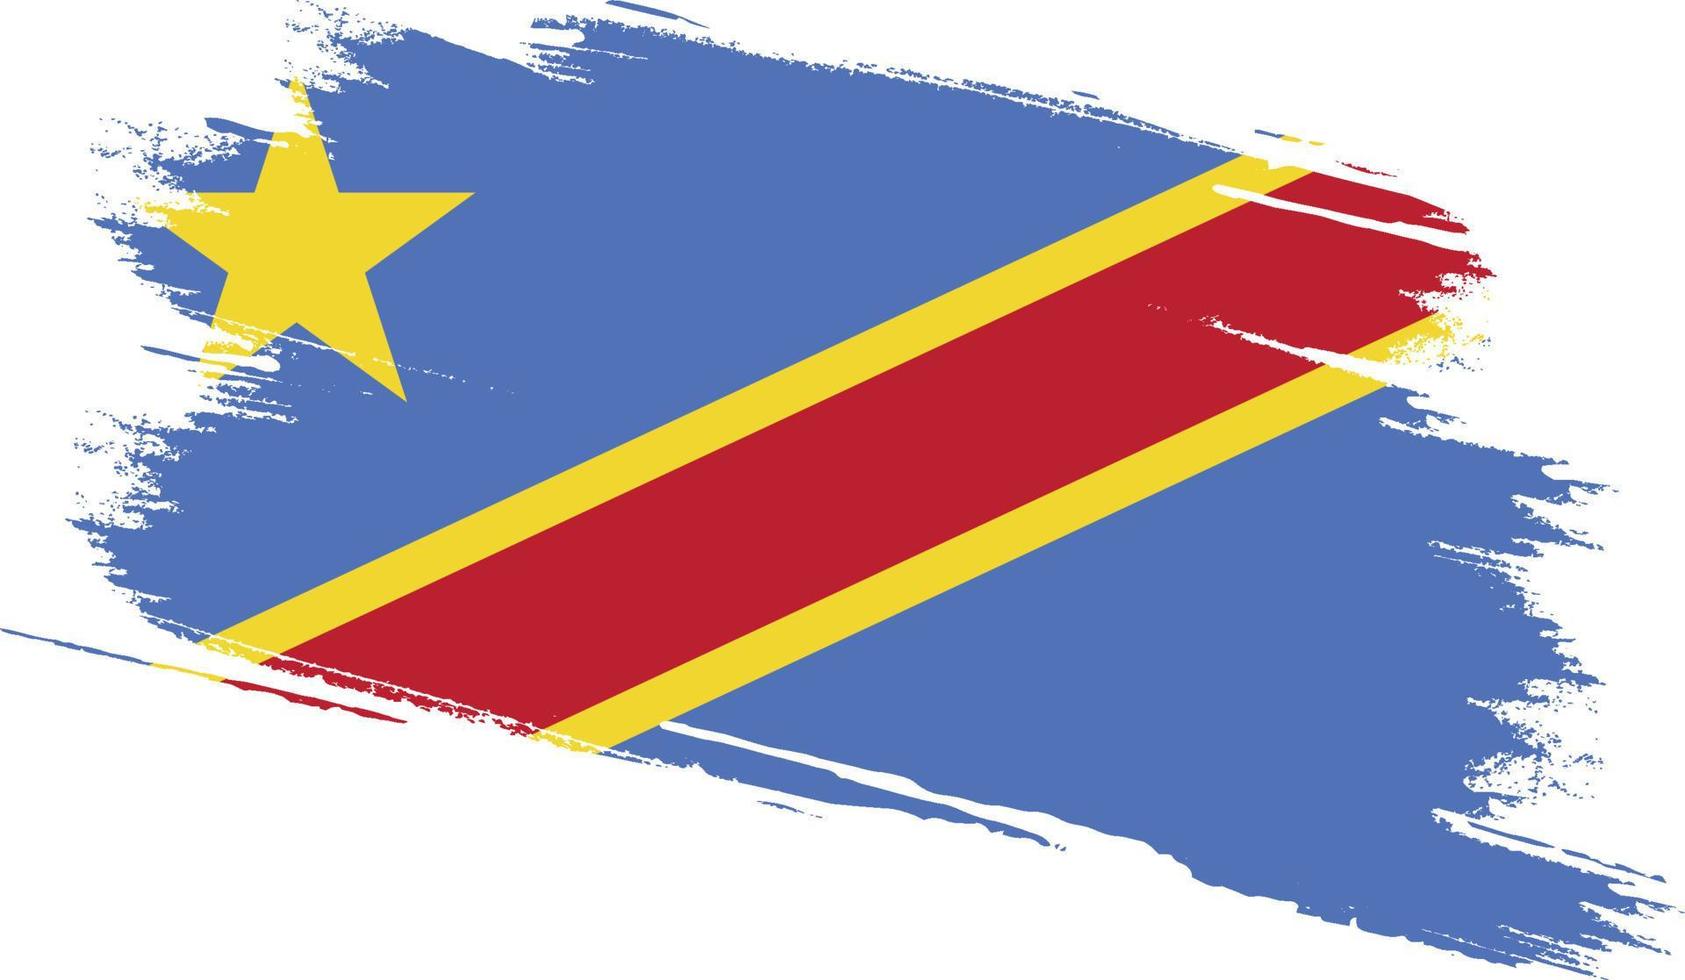 Democratic Republic of the Congo flag with grunge texture vector